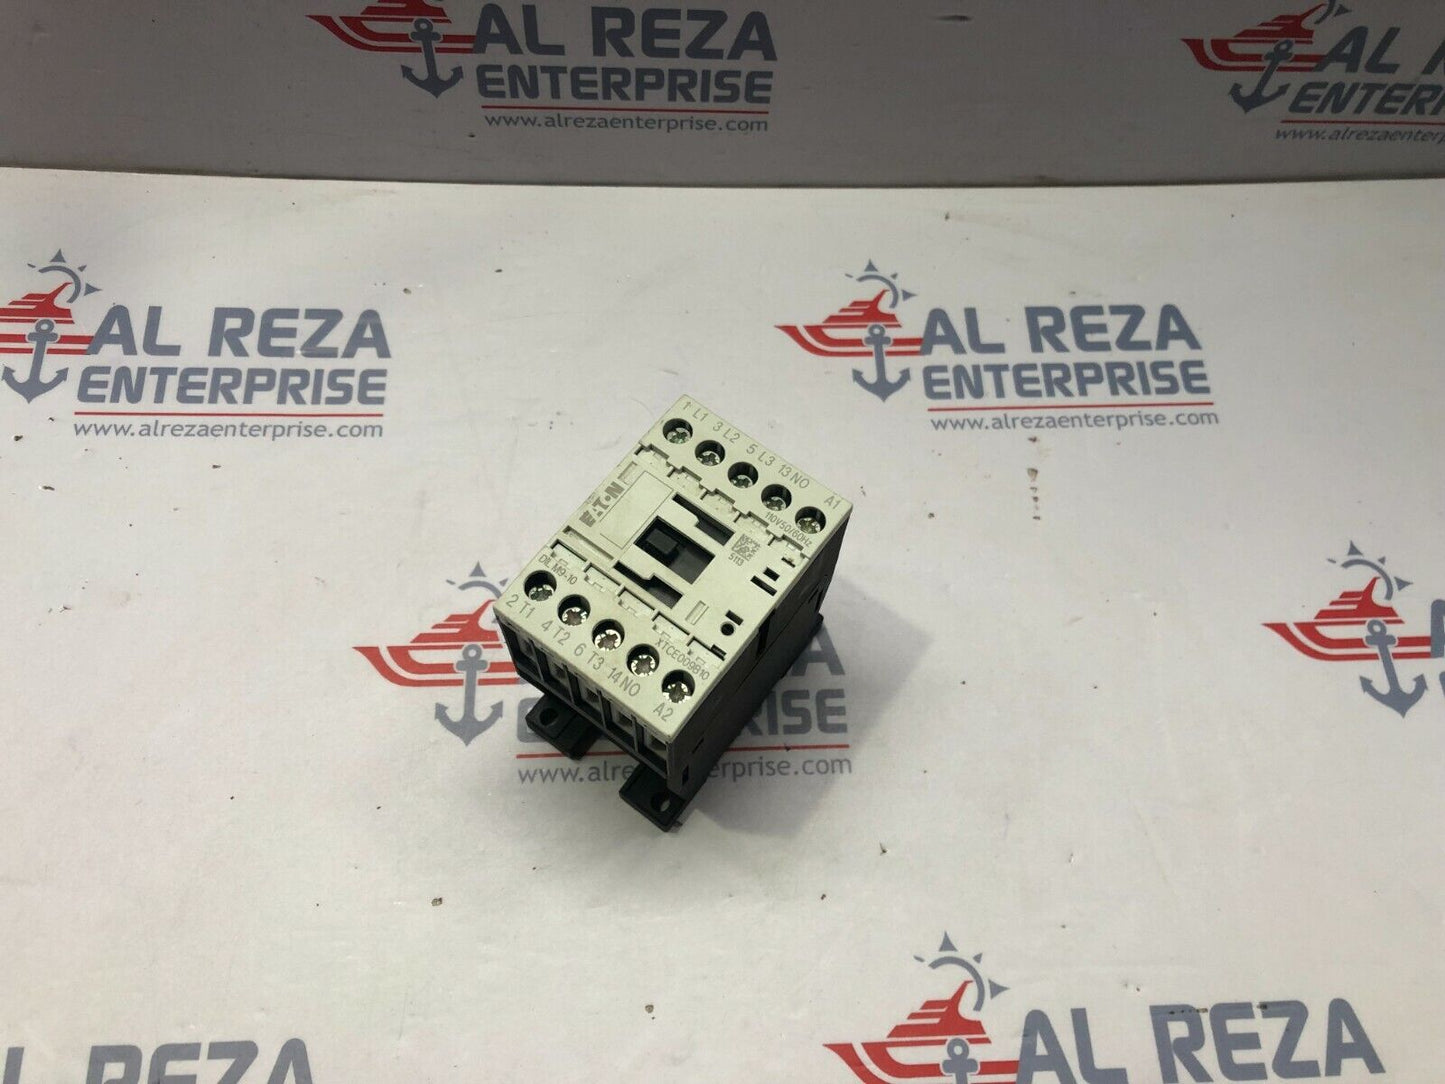 EATON DIL M9-10 3-POLE CONTACTOR XTCE009B10 110V